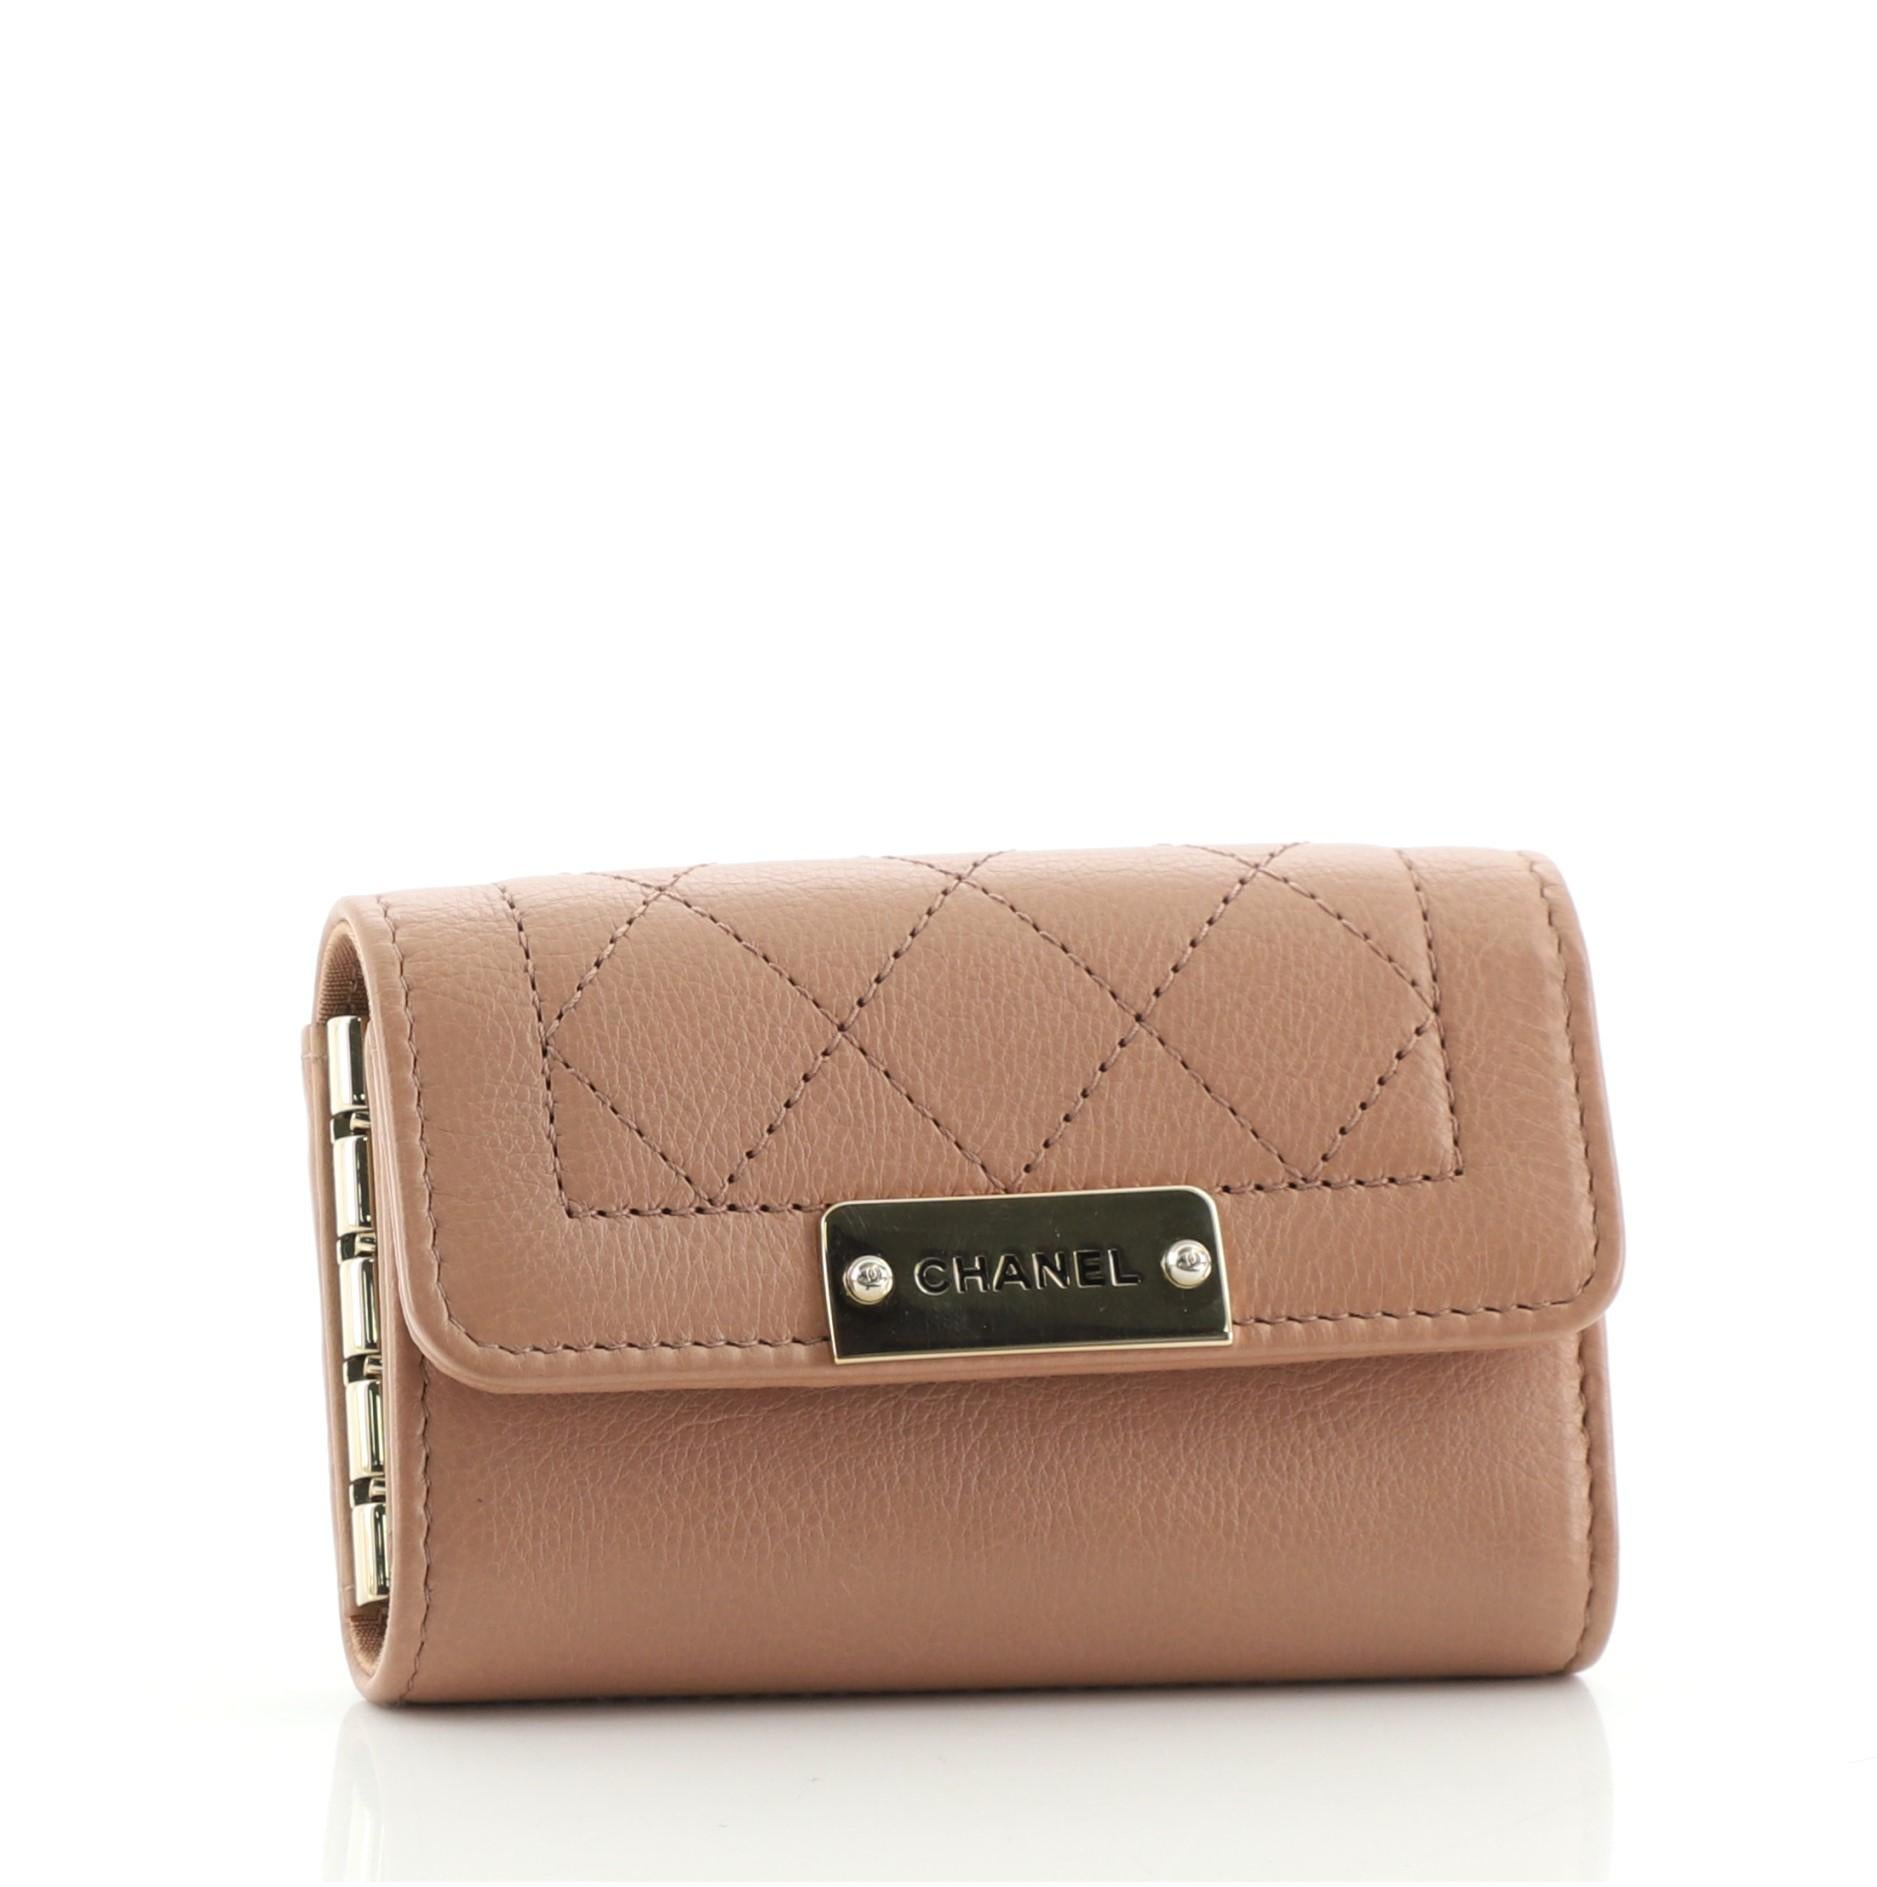 Chanel Label Click 4 Key Holder Quilted Calfskin
Neutral Calfskin

Condition Details: Minor wear and scuff in interior, scratches on hardware.

59278MSC

Height 